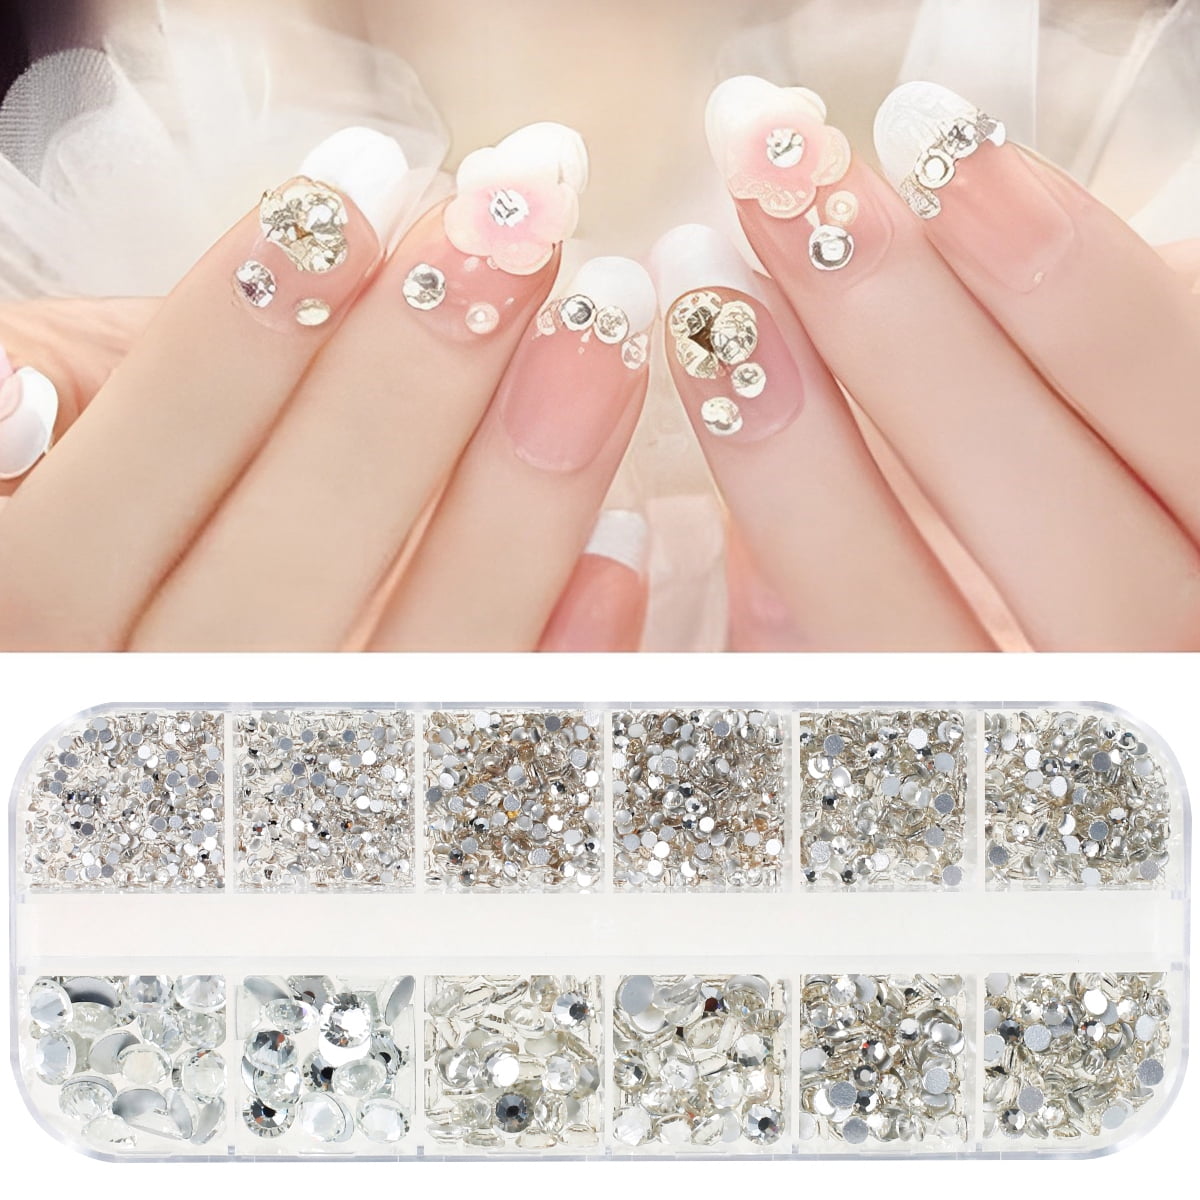  Anezus 4728Pcs Nail Gems with Crystals Rhinestones Jewls Pickup  Tool Pen for Nails, Nail Art Supplies Diamond Stones for Nails Decoration  Makeup Clothes Shoes : Beauty & Personal Care